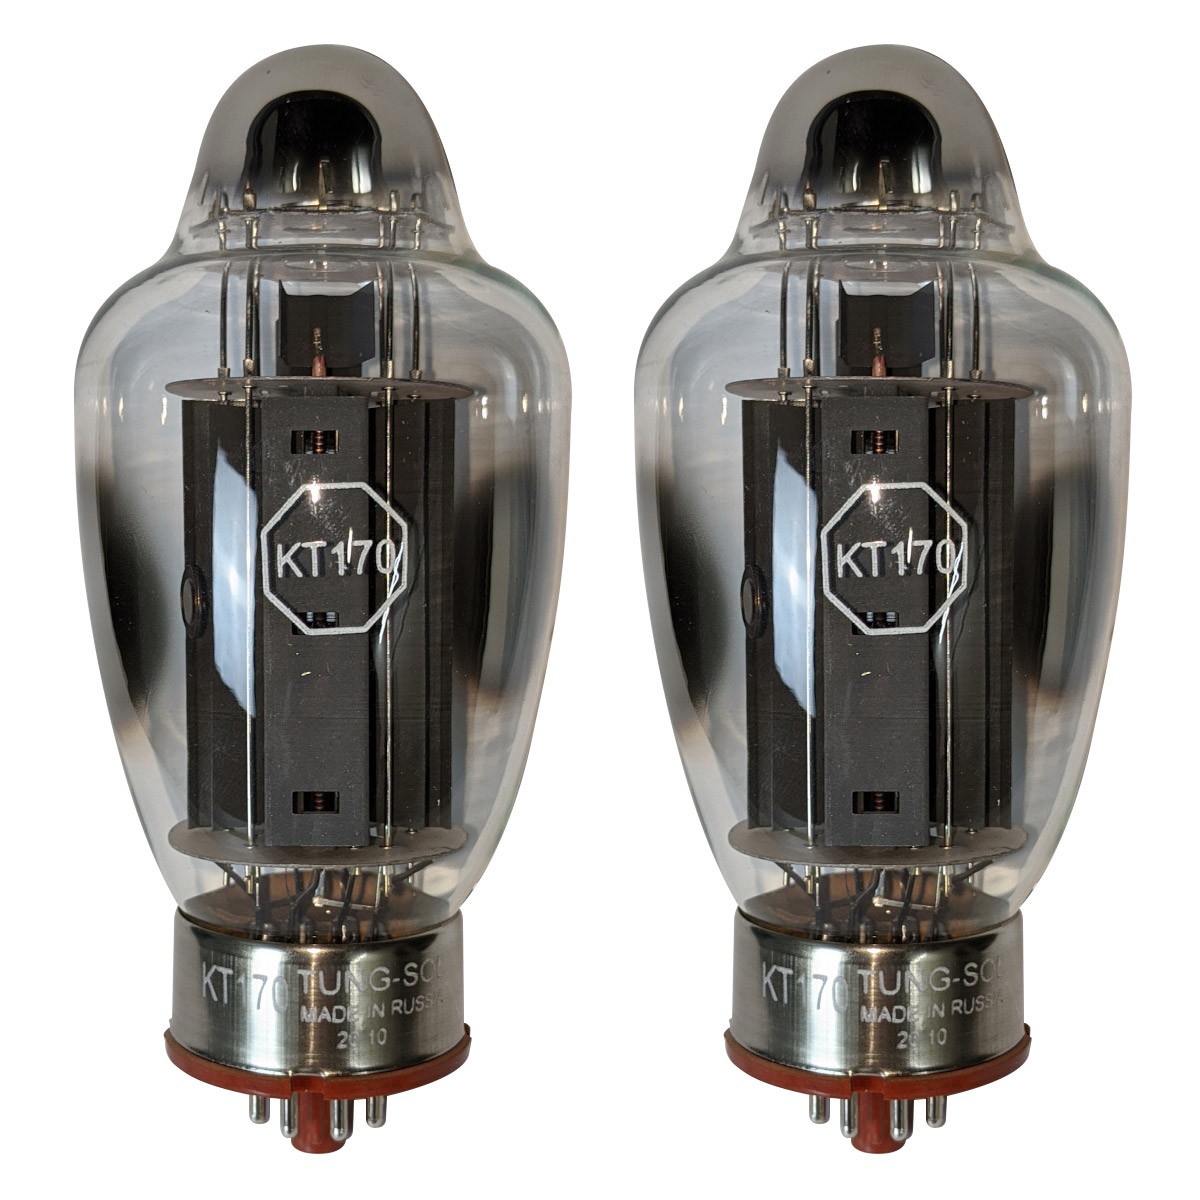 TUNG-SOL KT170 Power Tubes Tetrode High Quality (Matched Pair)